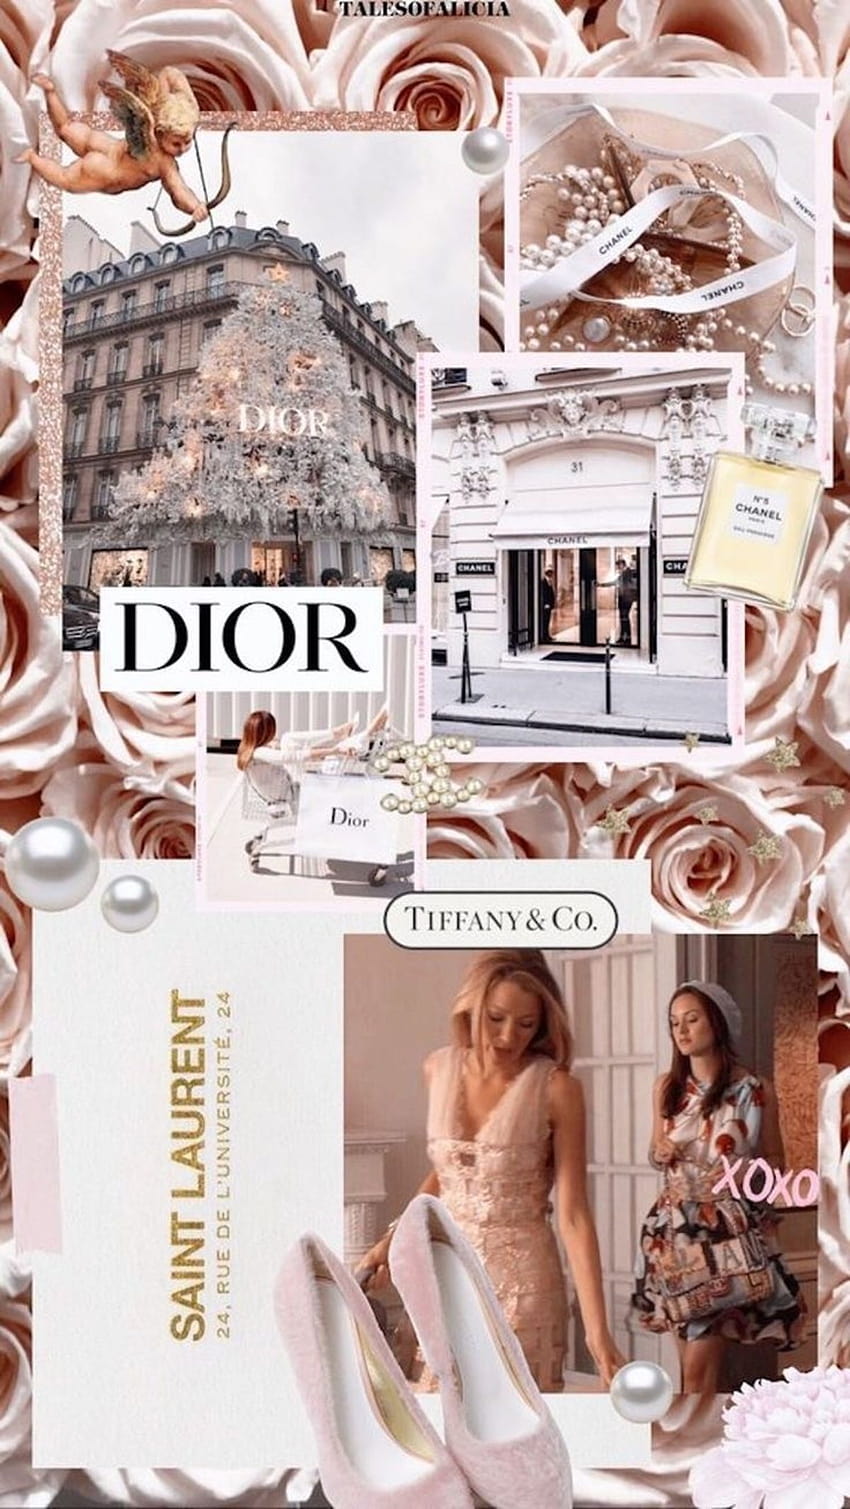 Update 67+ dior aesthetic wallpaper latest - in.cdgdbentre